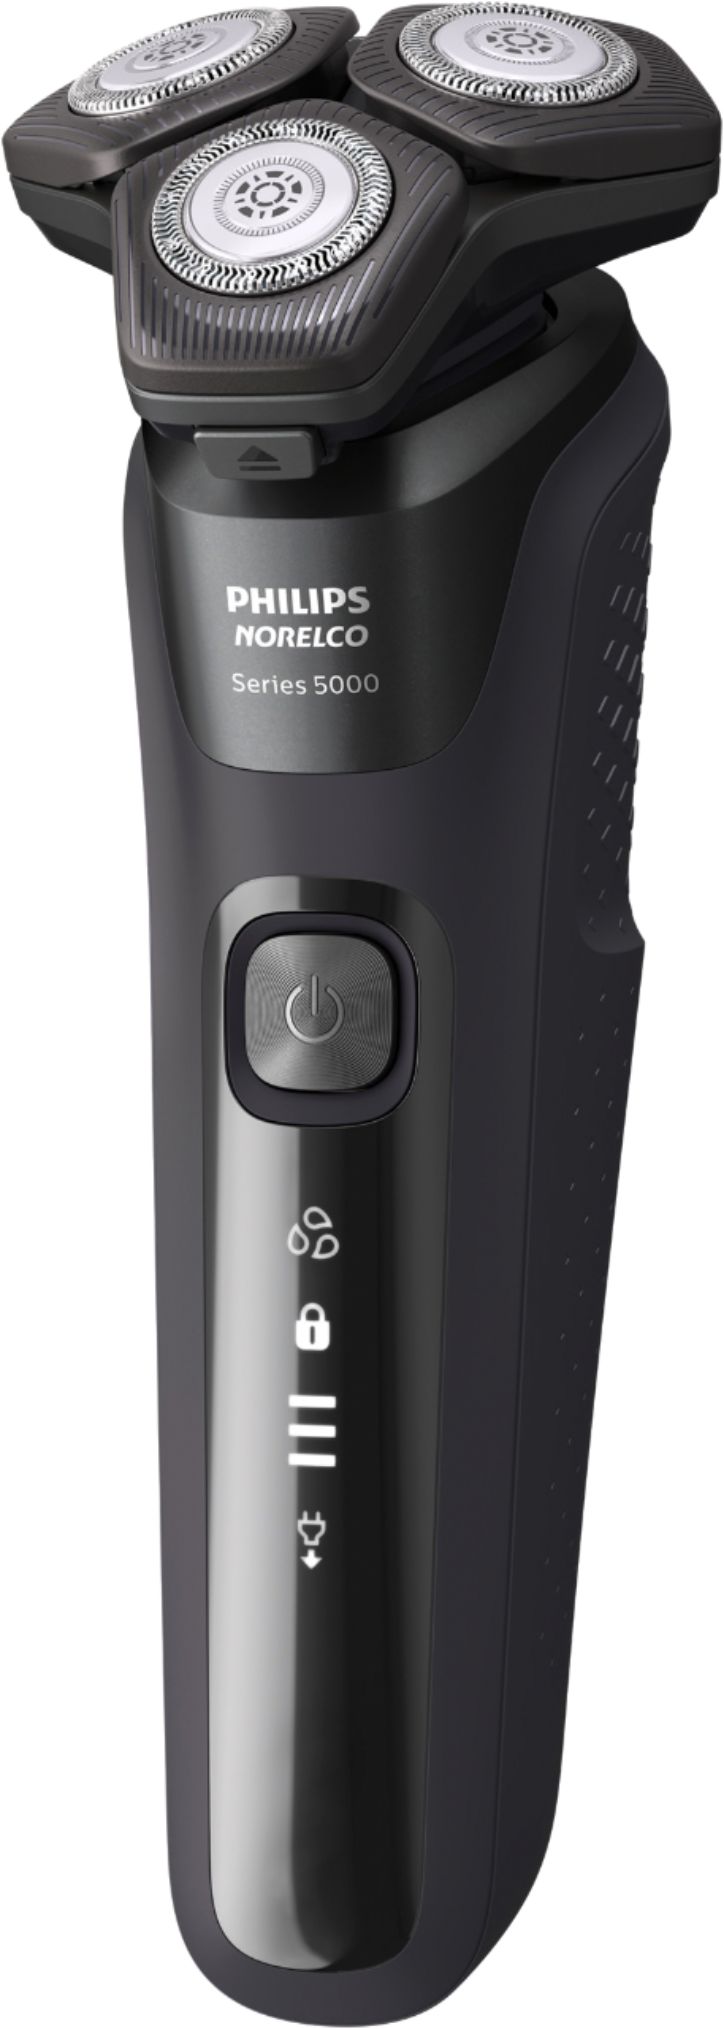 Left View: Philips Norelco Shaver 5300, Rechargeable Wet & Dry Shaver with Pop-Up Trimmer, S5588/81